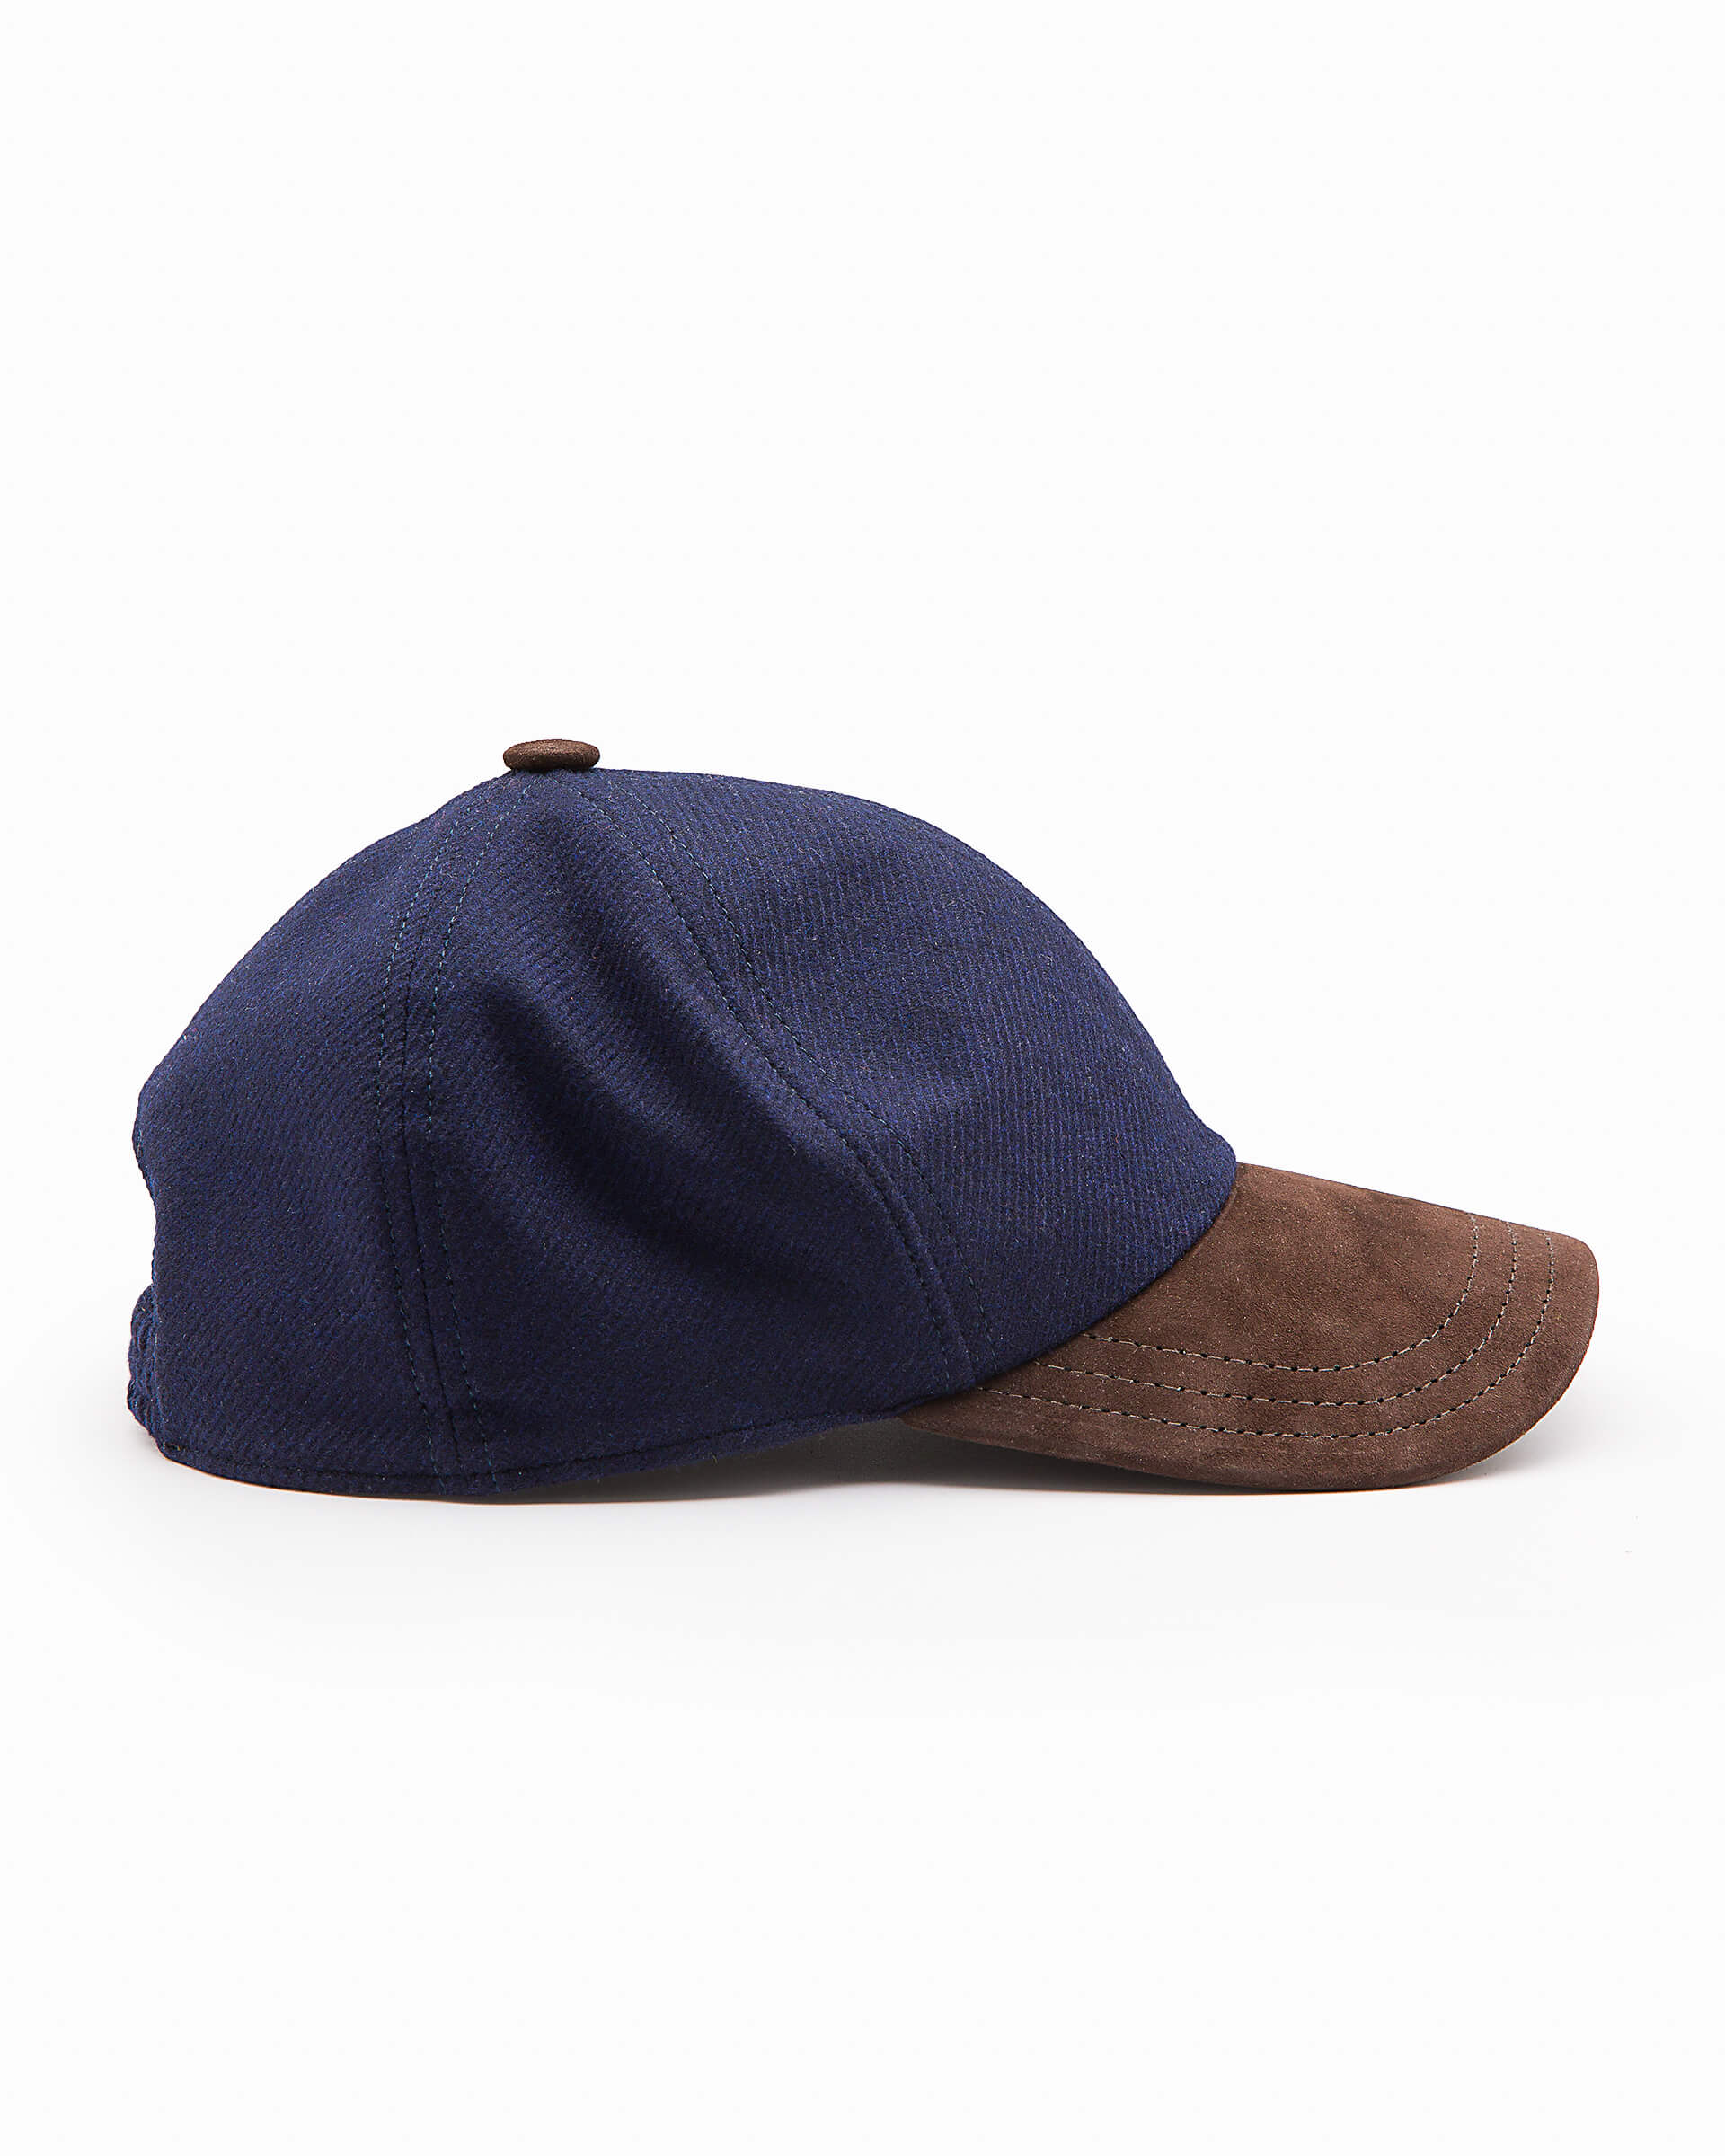 of water-repellent cap Firenze blue visor Ventura Baseball cashmere - with Andrea hat made eclipse